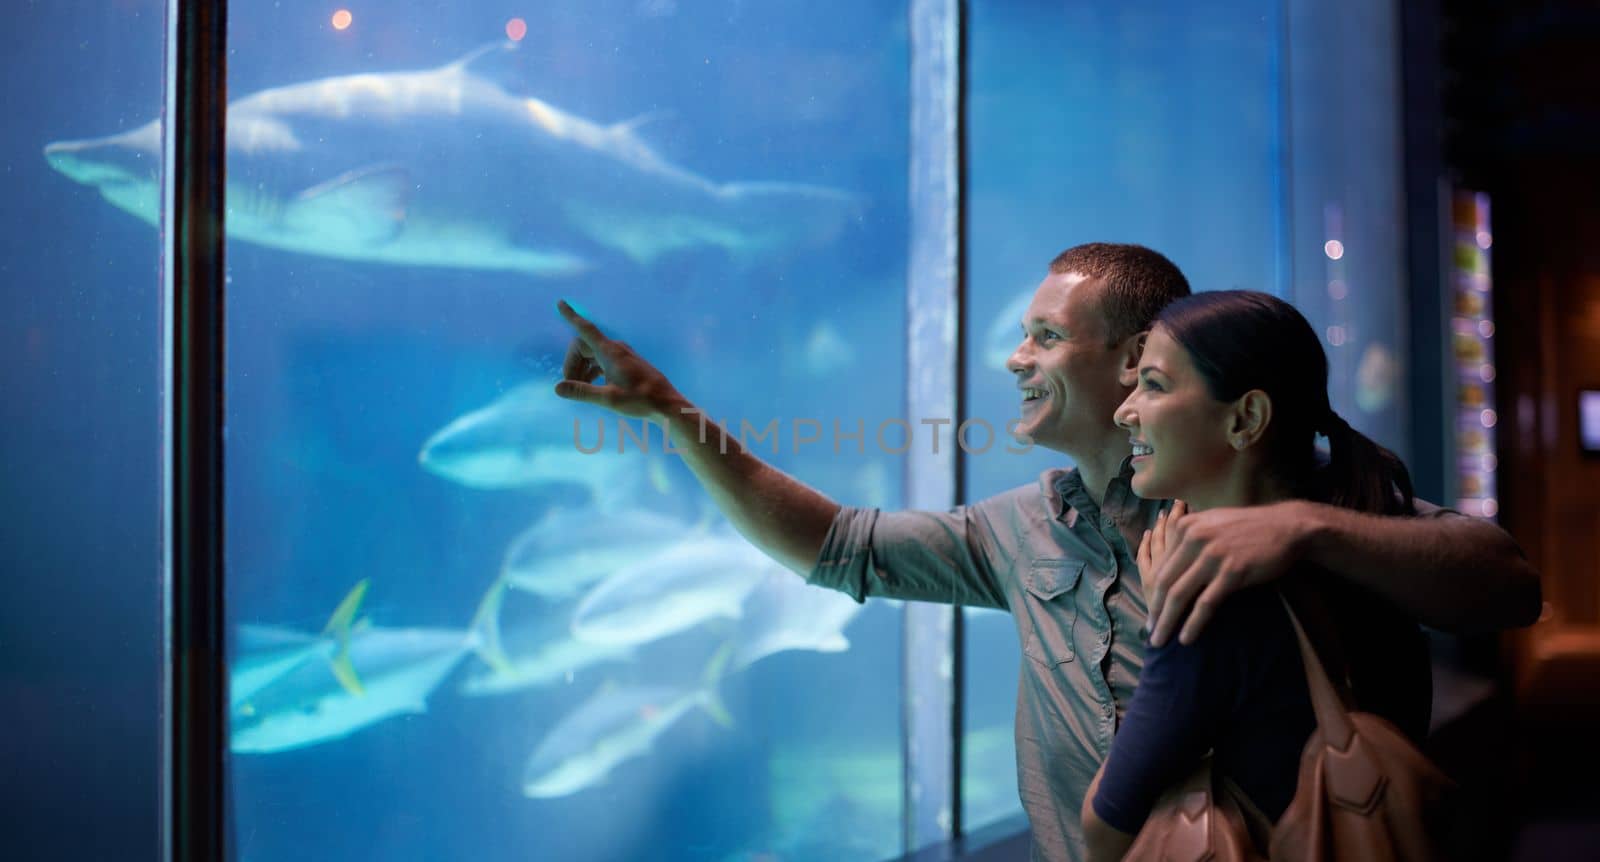 Delving into the deep. a young couple looking at the fish in an aquarium. by YuriArcurs